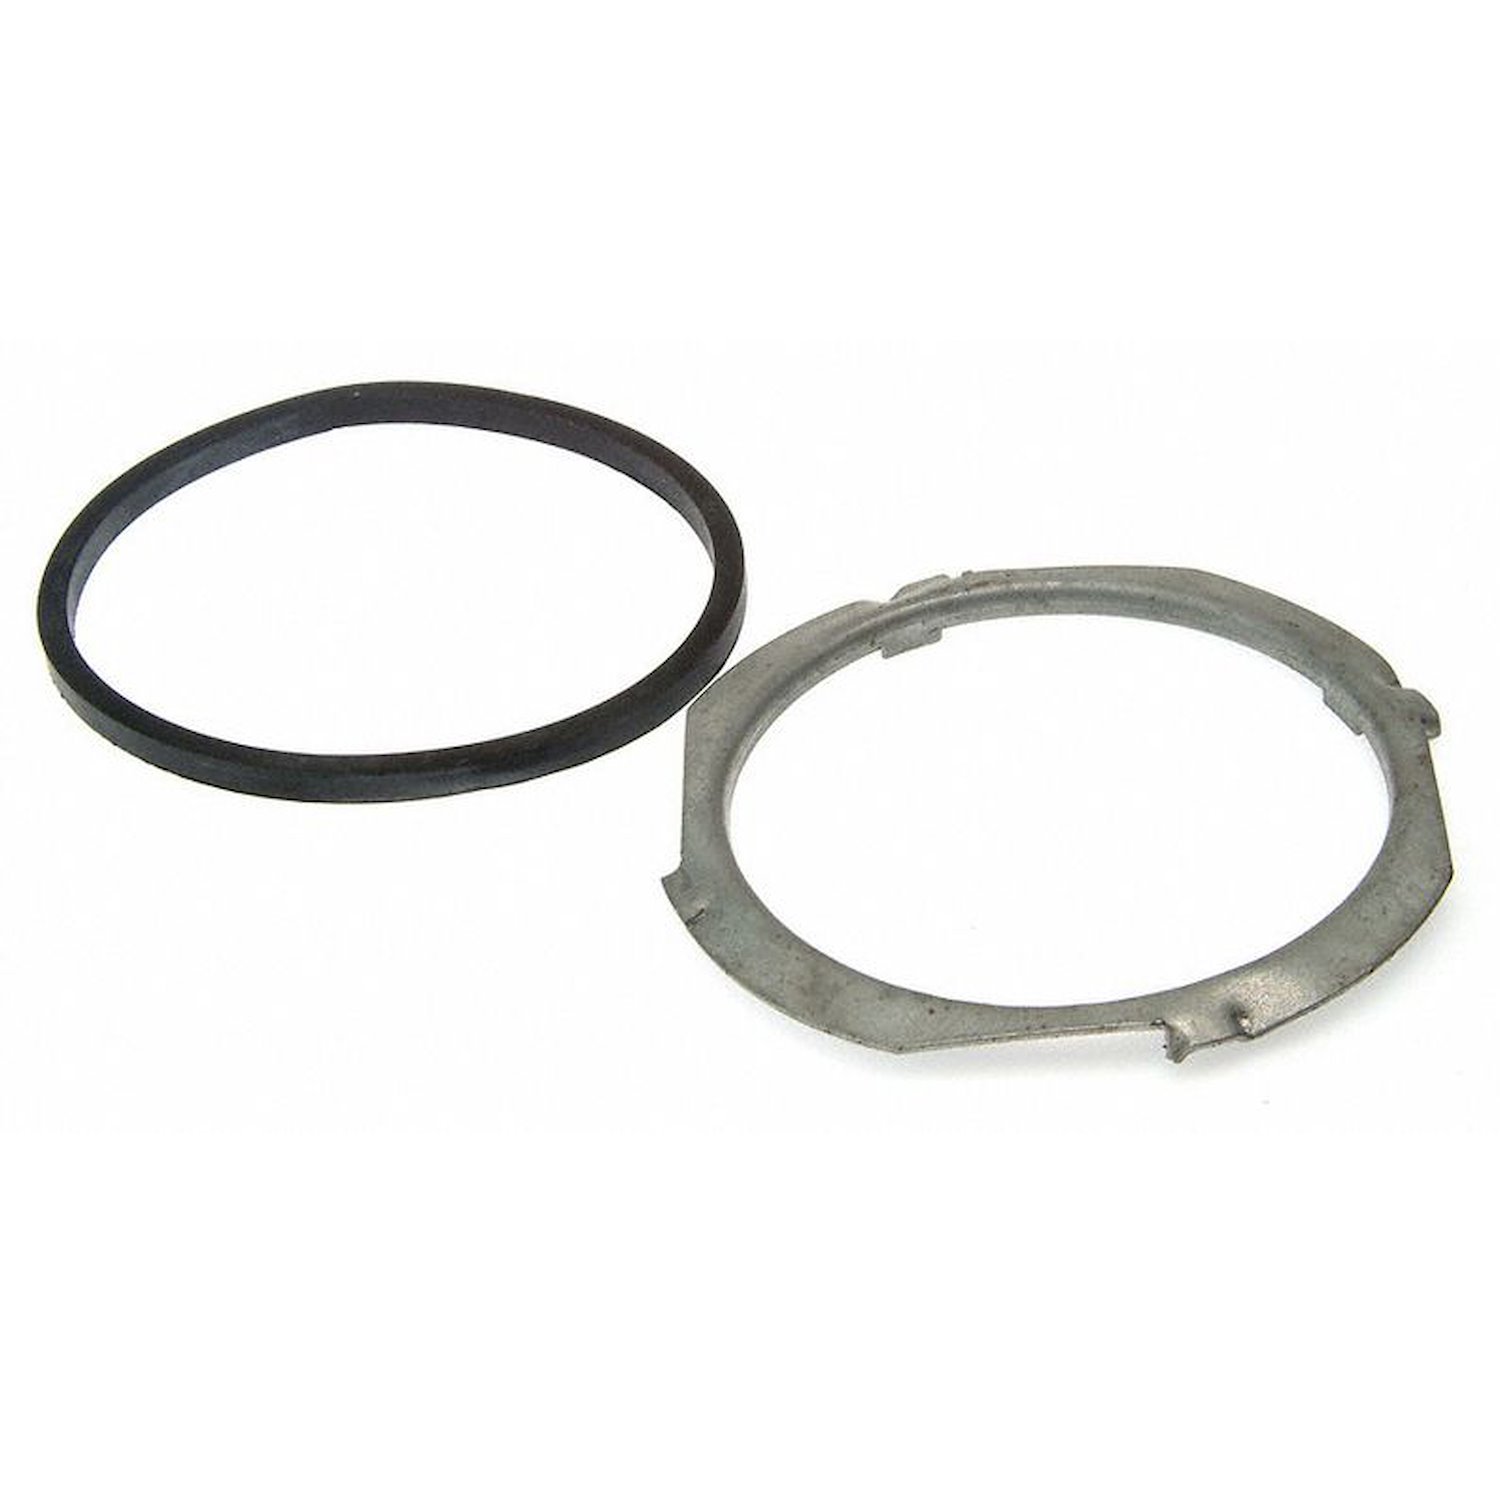 Fuel Tank Lock Ring for 1987-1995 Dodge Caravan/1991-1993 Chrysler Town & Country/1994-1995 Plymouth Voyager